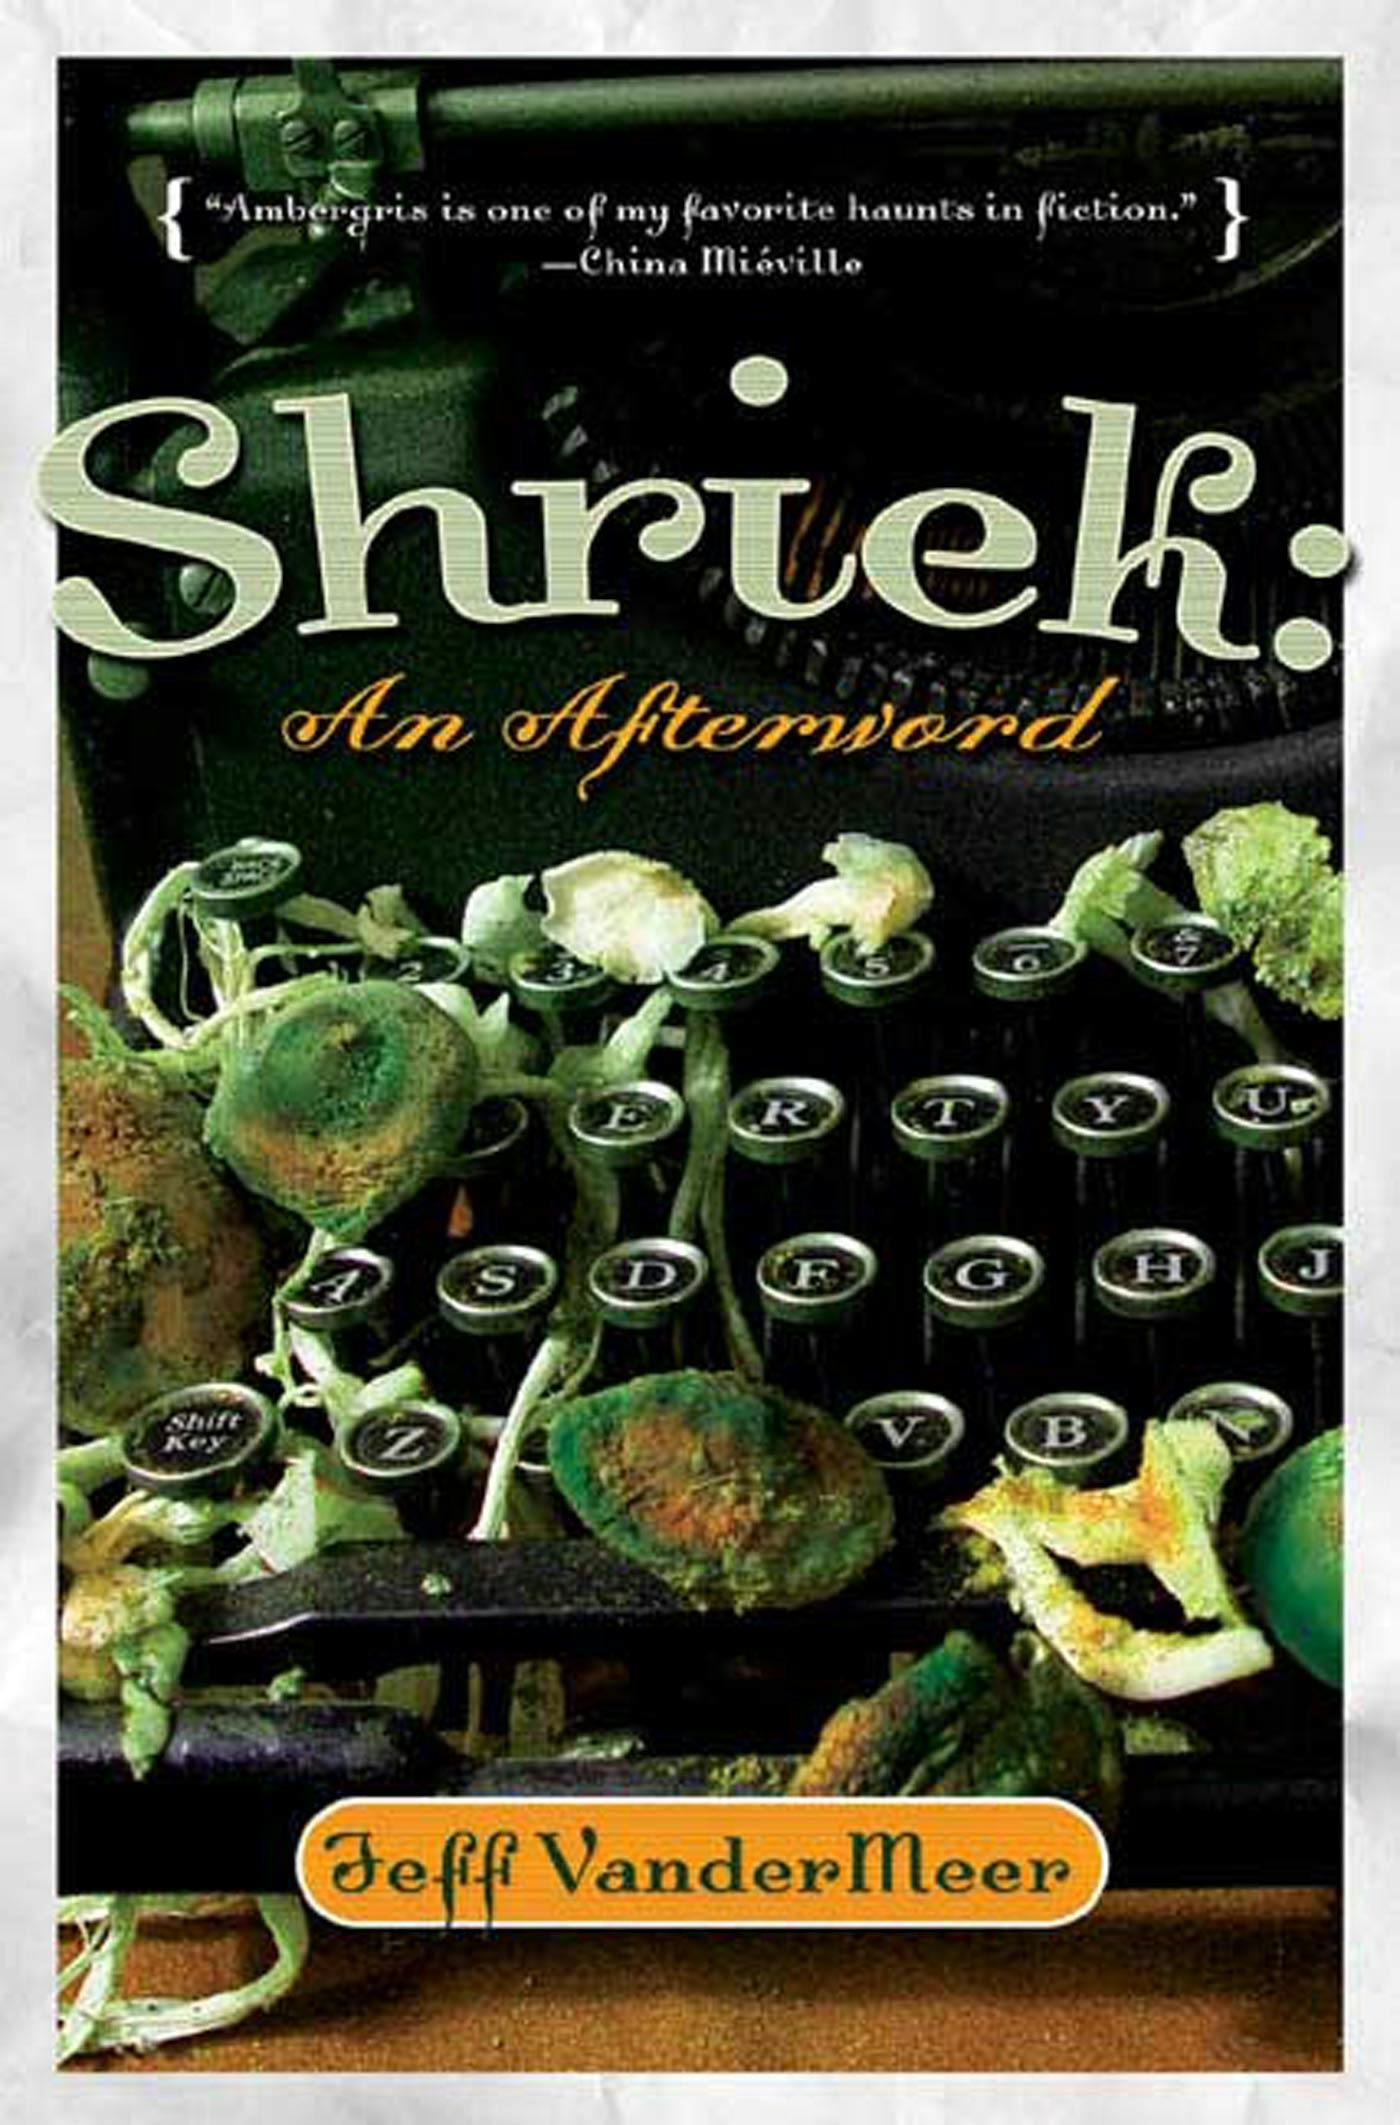 Cover for the book titled as: Shriek: An Afterword